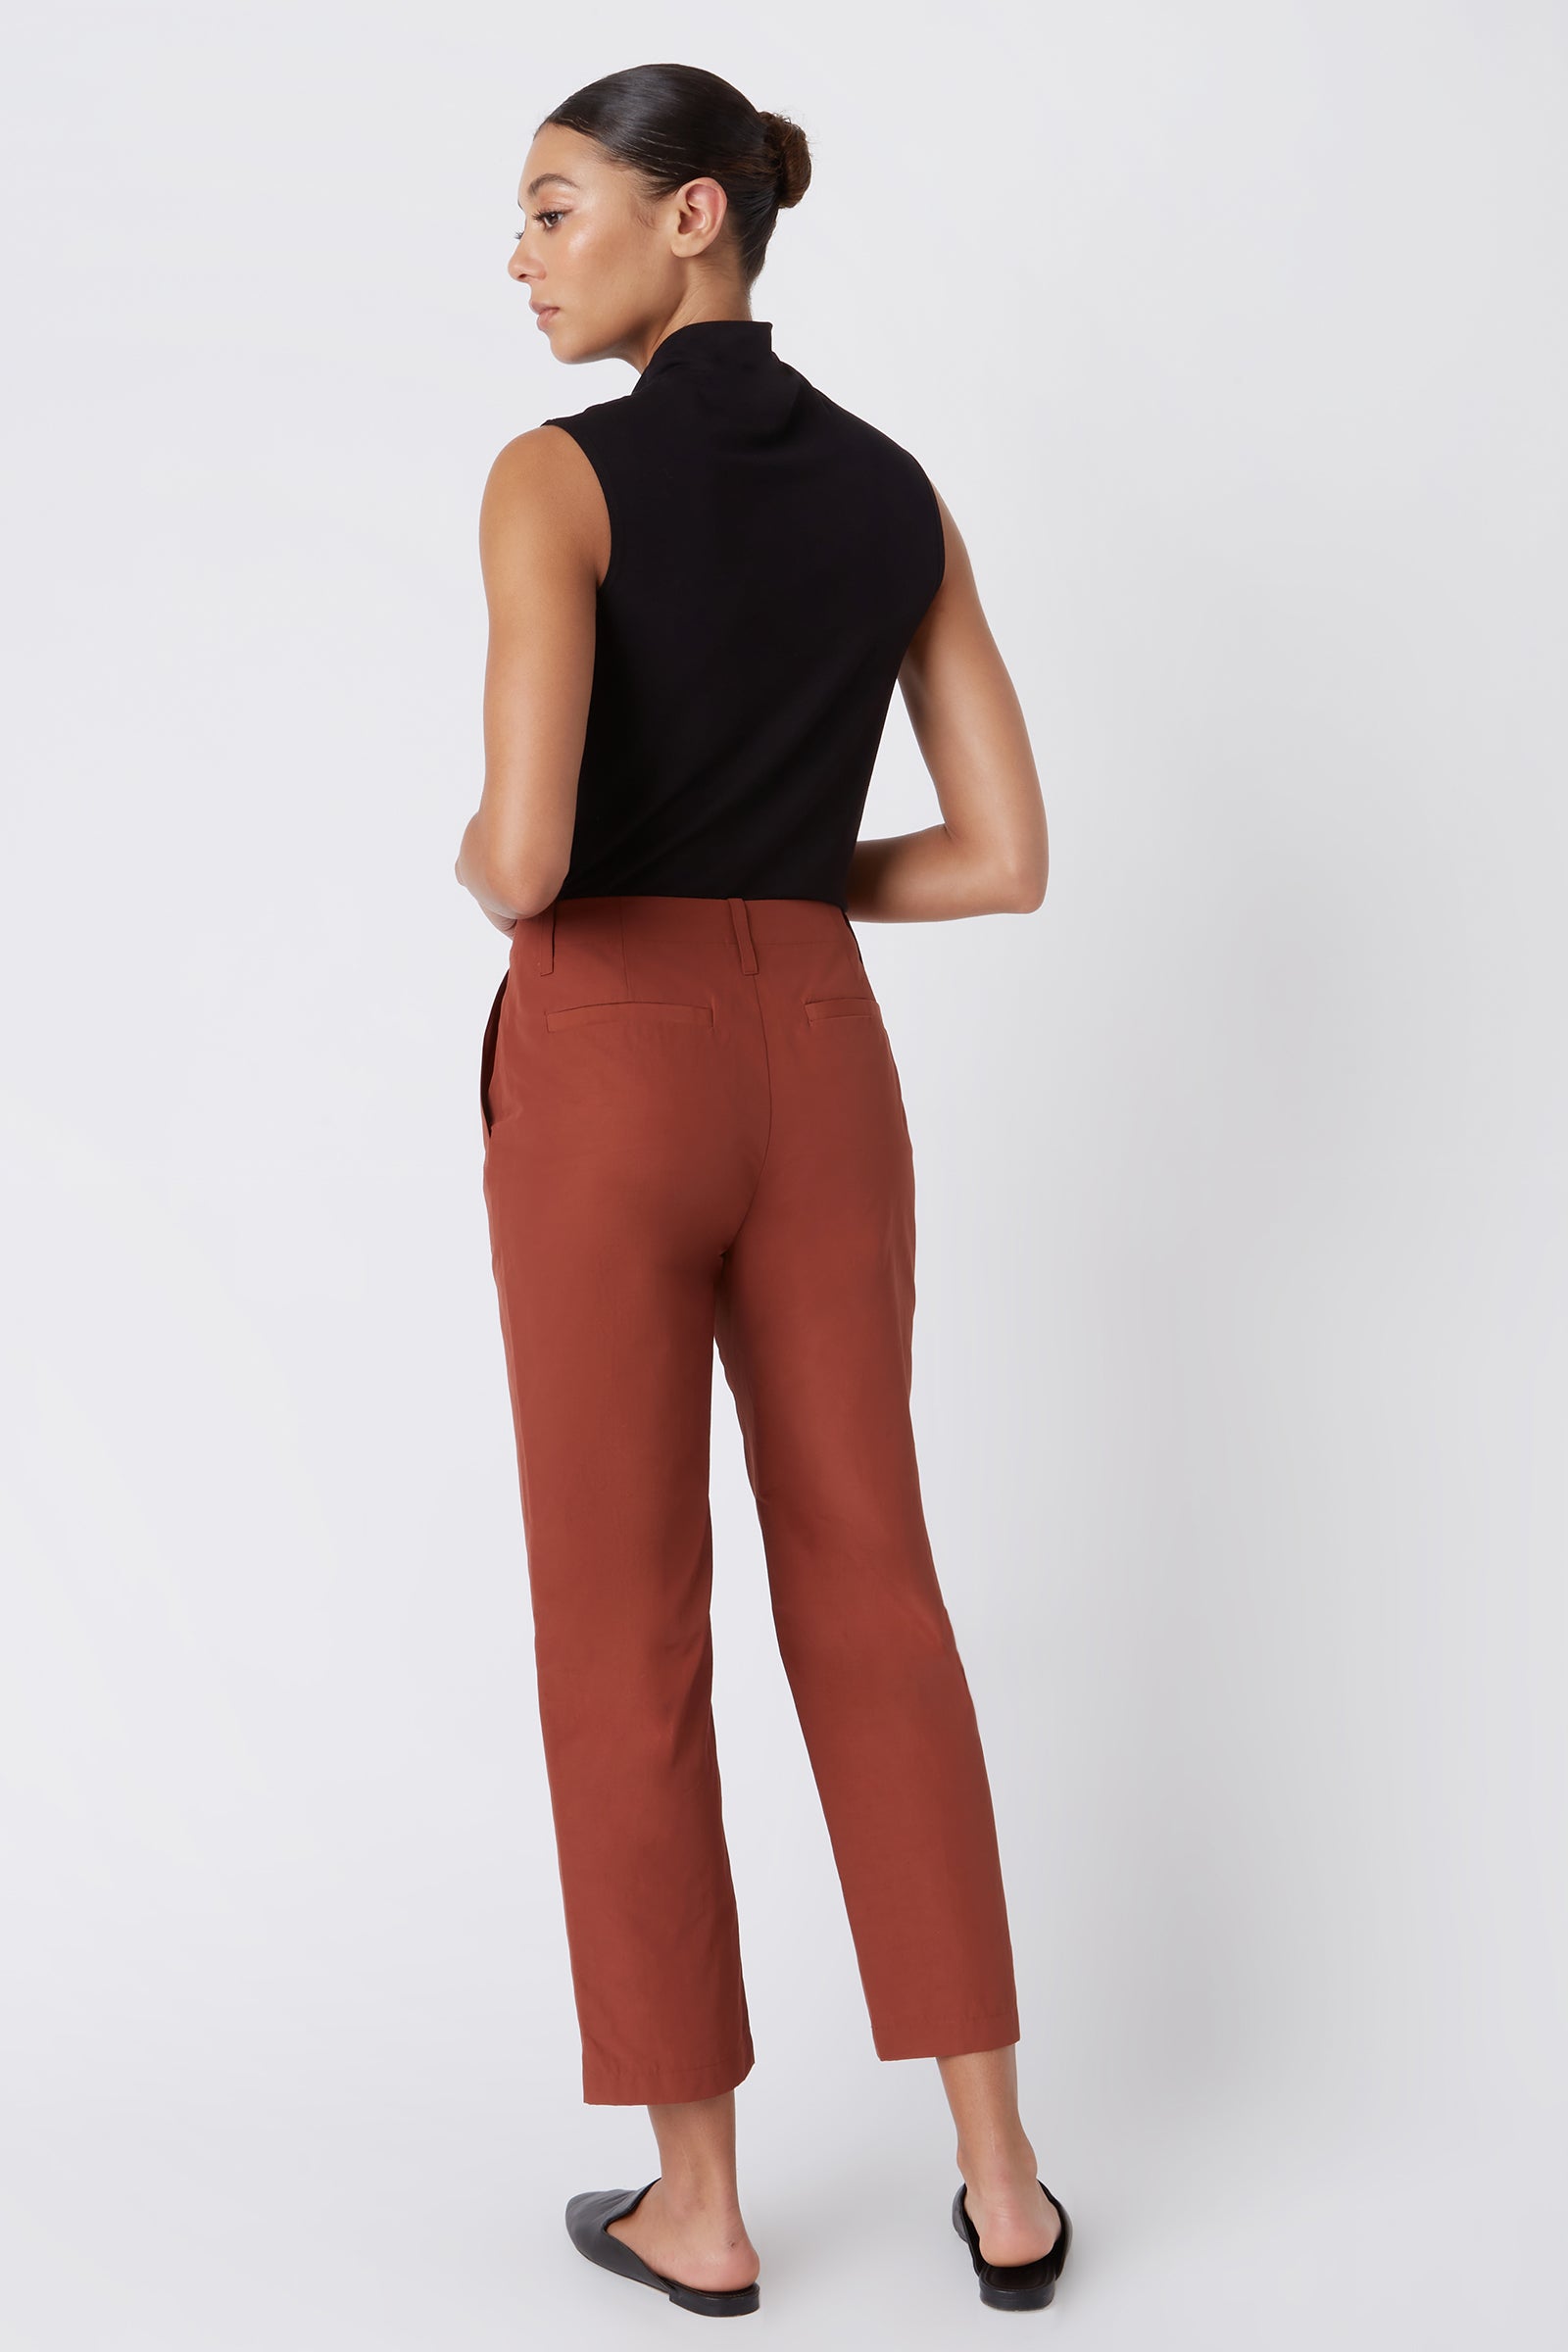 Kal Rieman Francoise Cigarette Pant in Rust Italian Broadcloth on Model with Hands in Pockets Full Front Side View